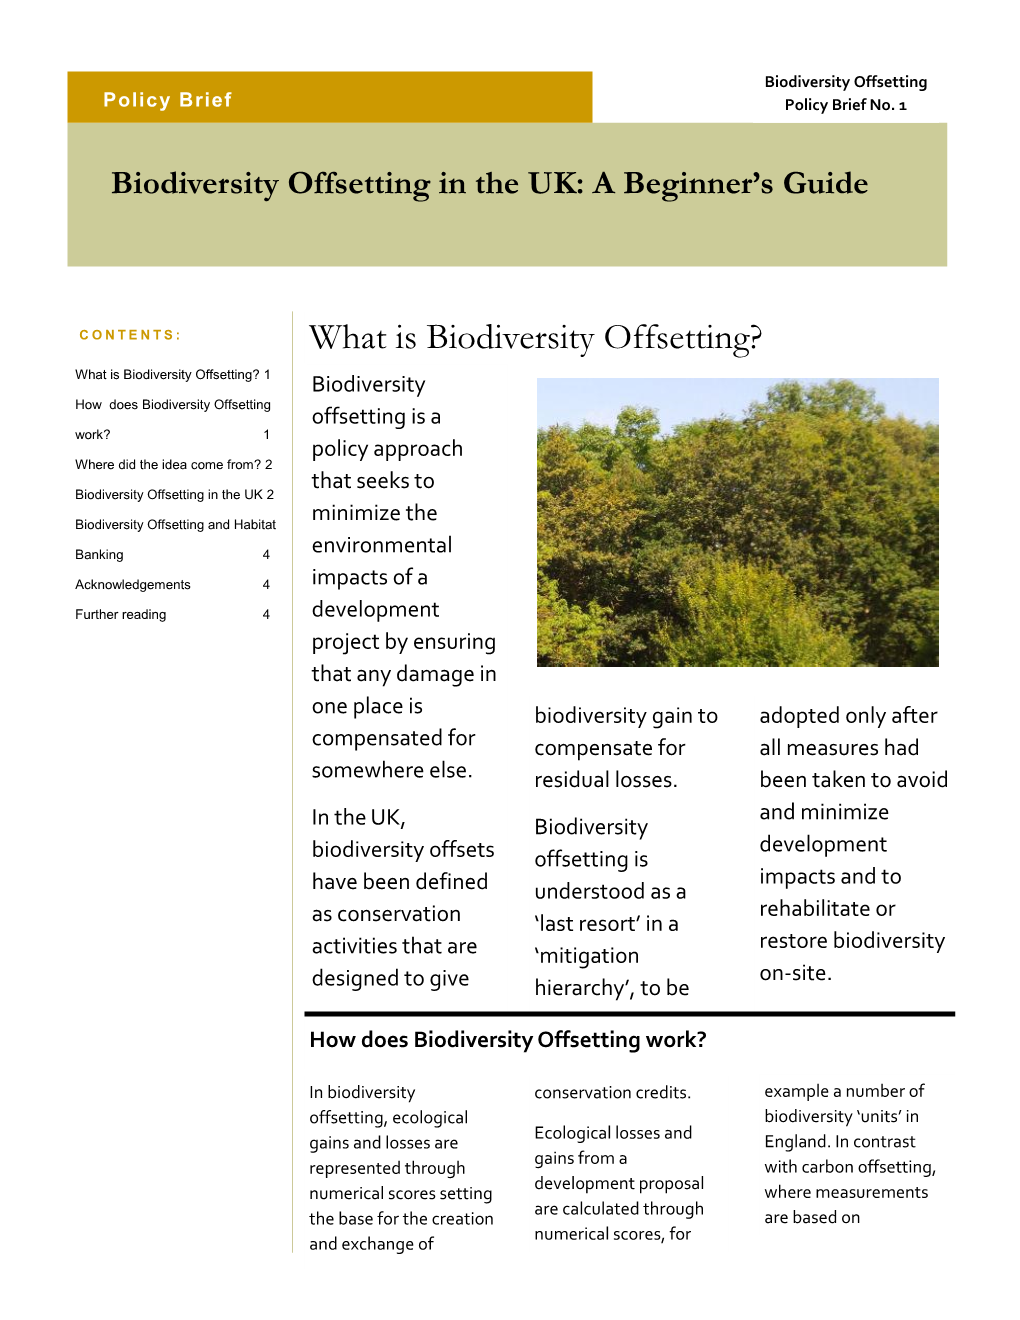 What Is Biodiversity Offsetting?